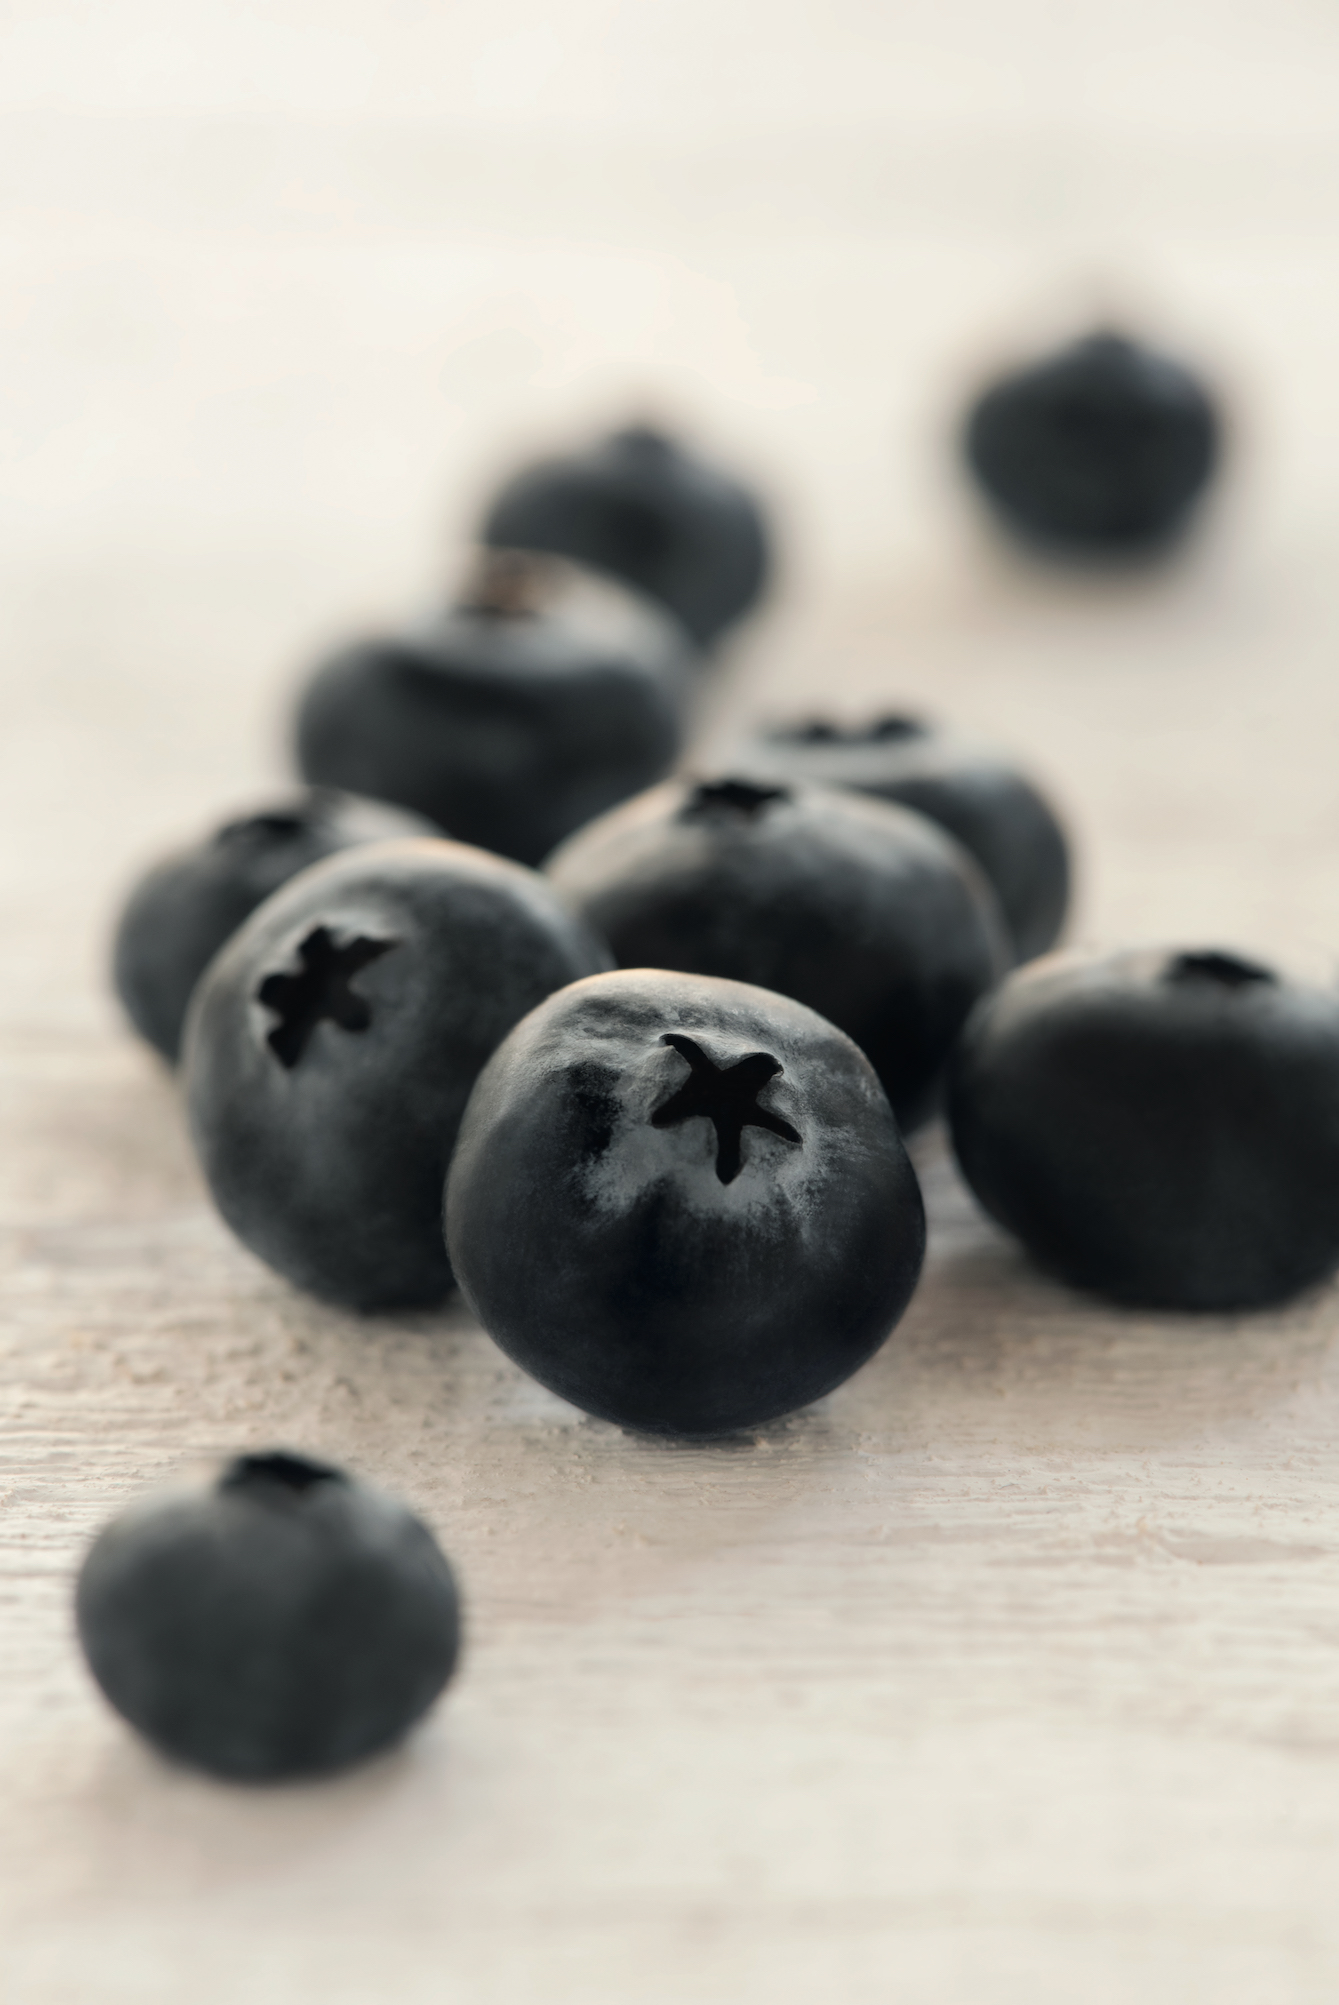 US trade commission finds that blueberry imports do not threaten domestic industry